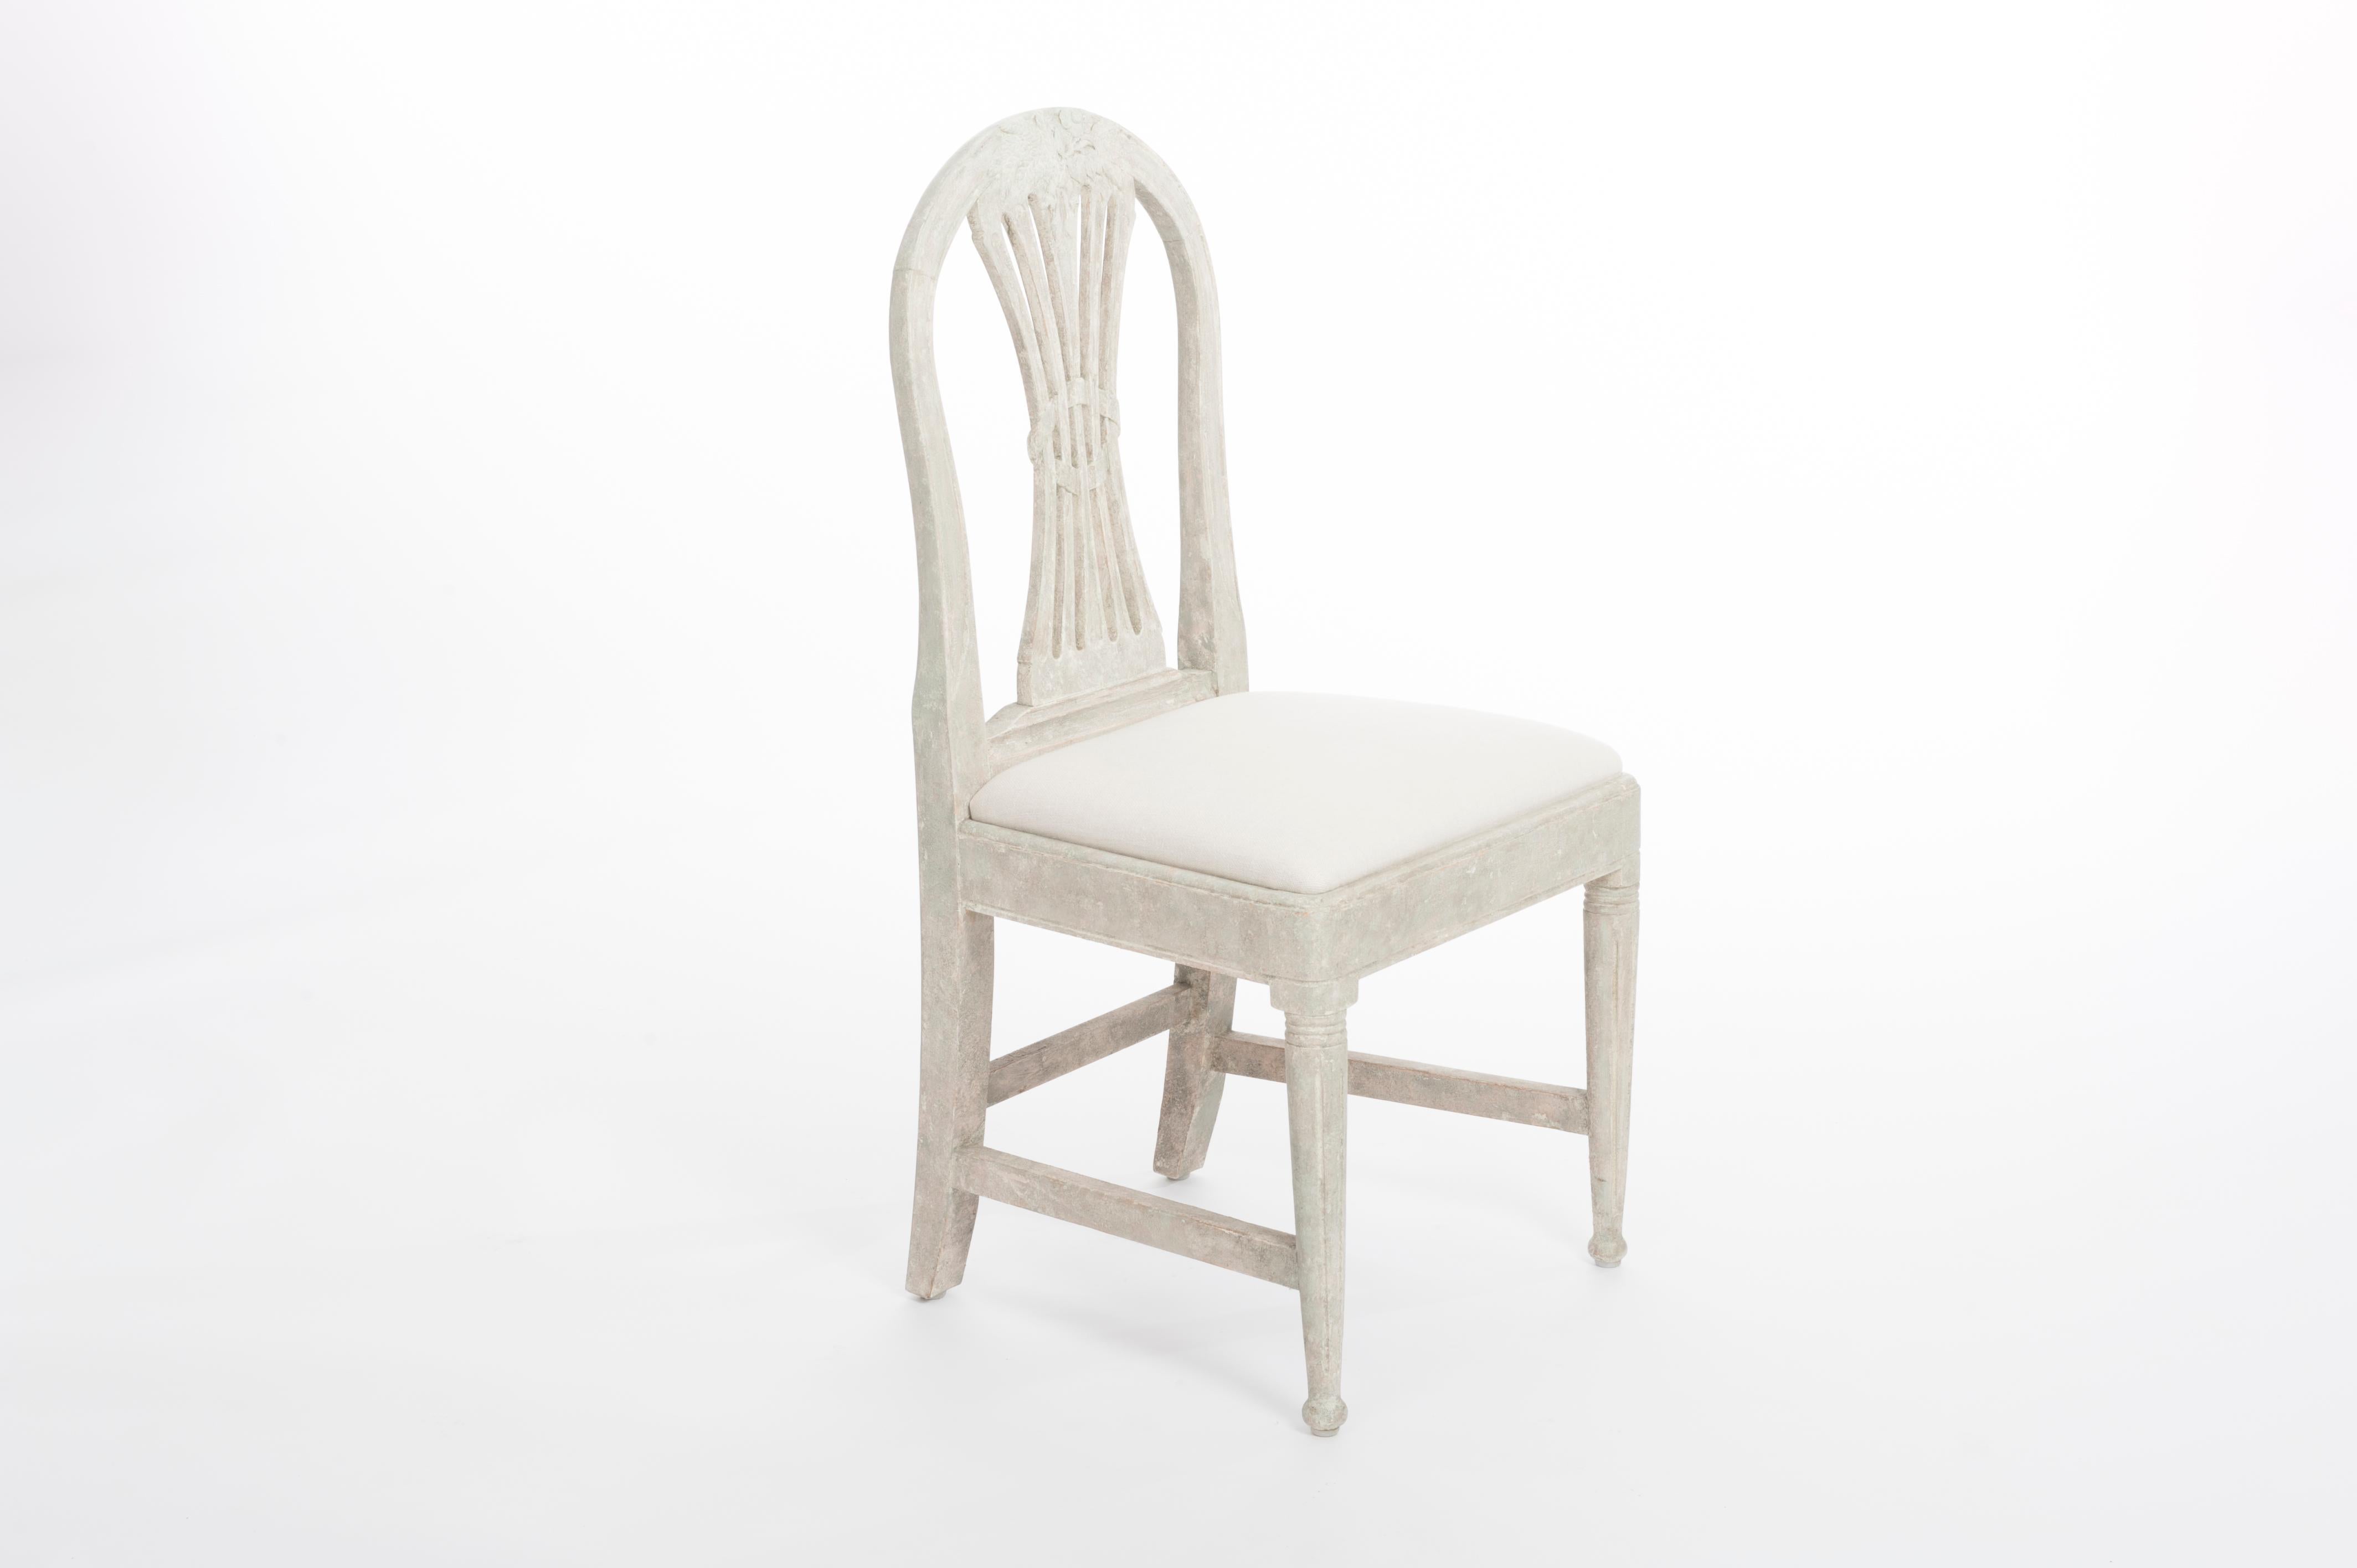 Swedish 4 Hand Painted Gustavian Dining Chairs in Pale Green-Gray Color 19th Century